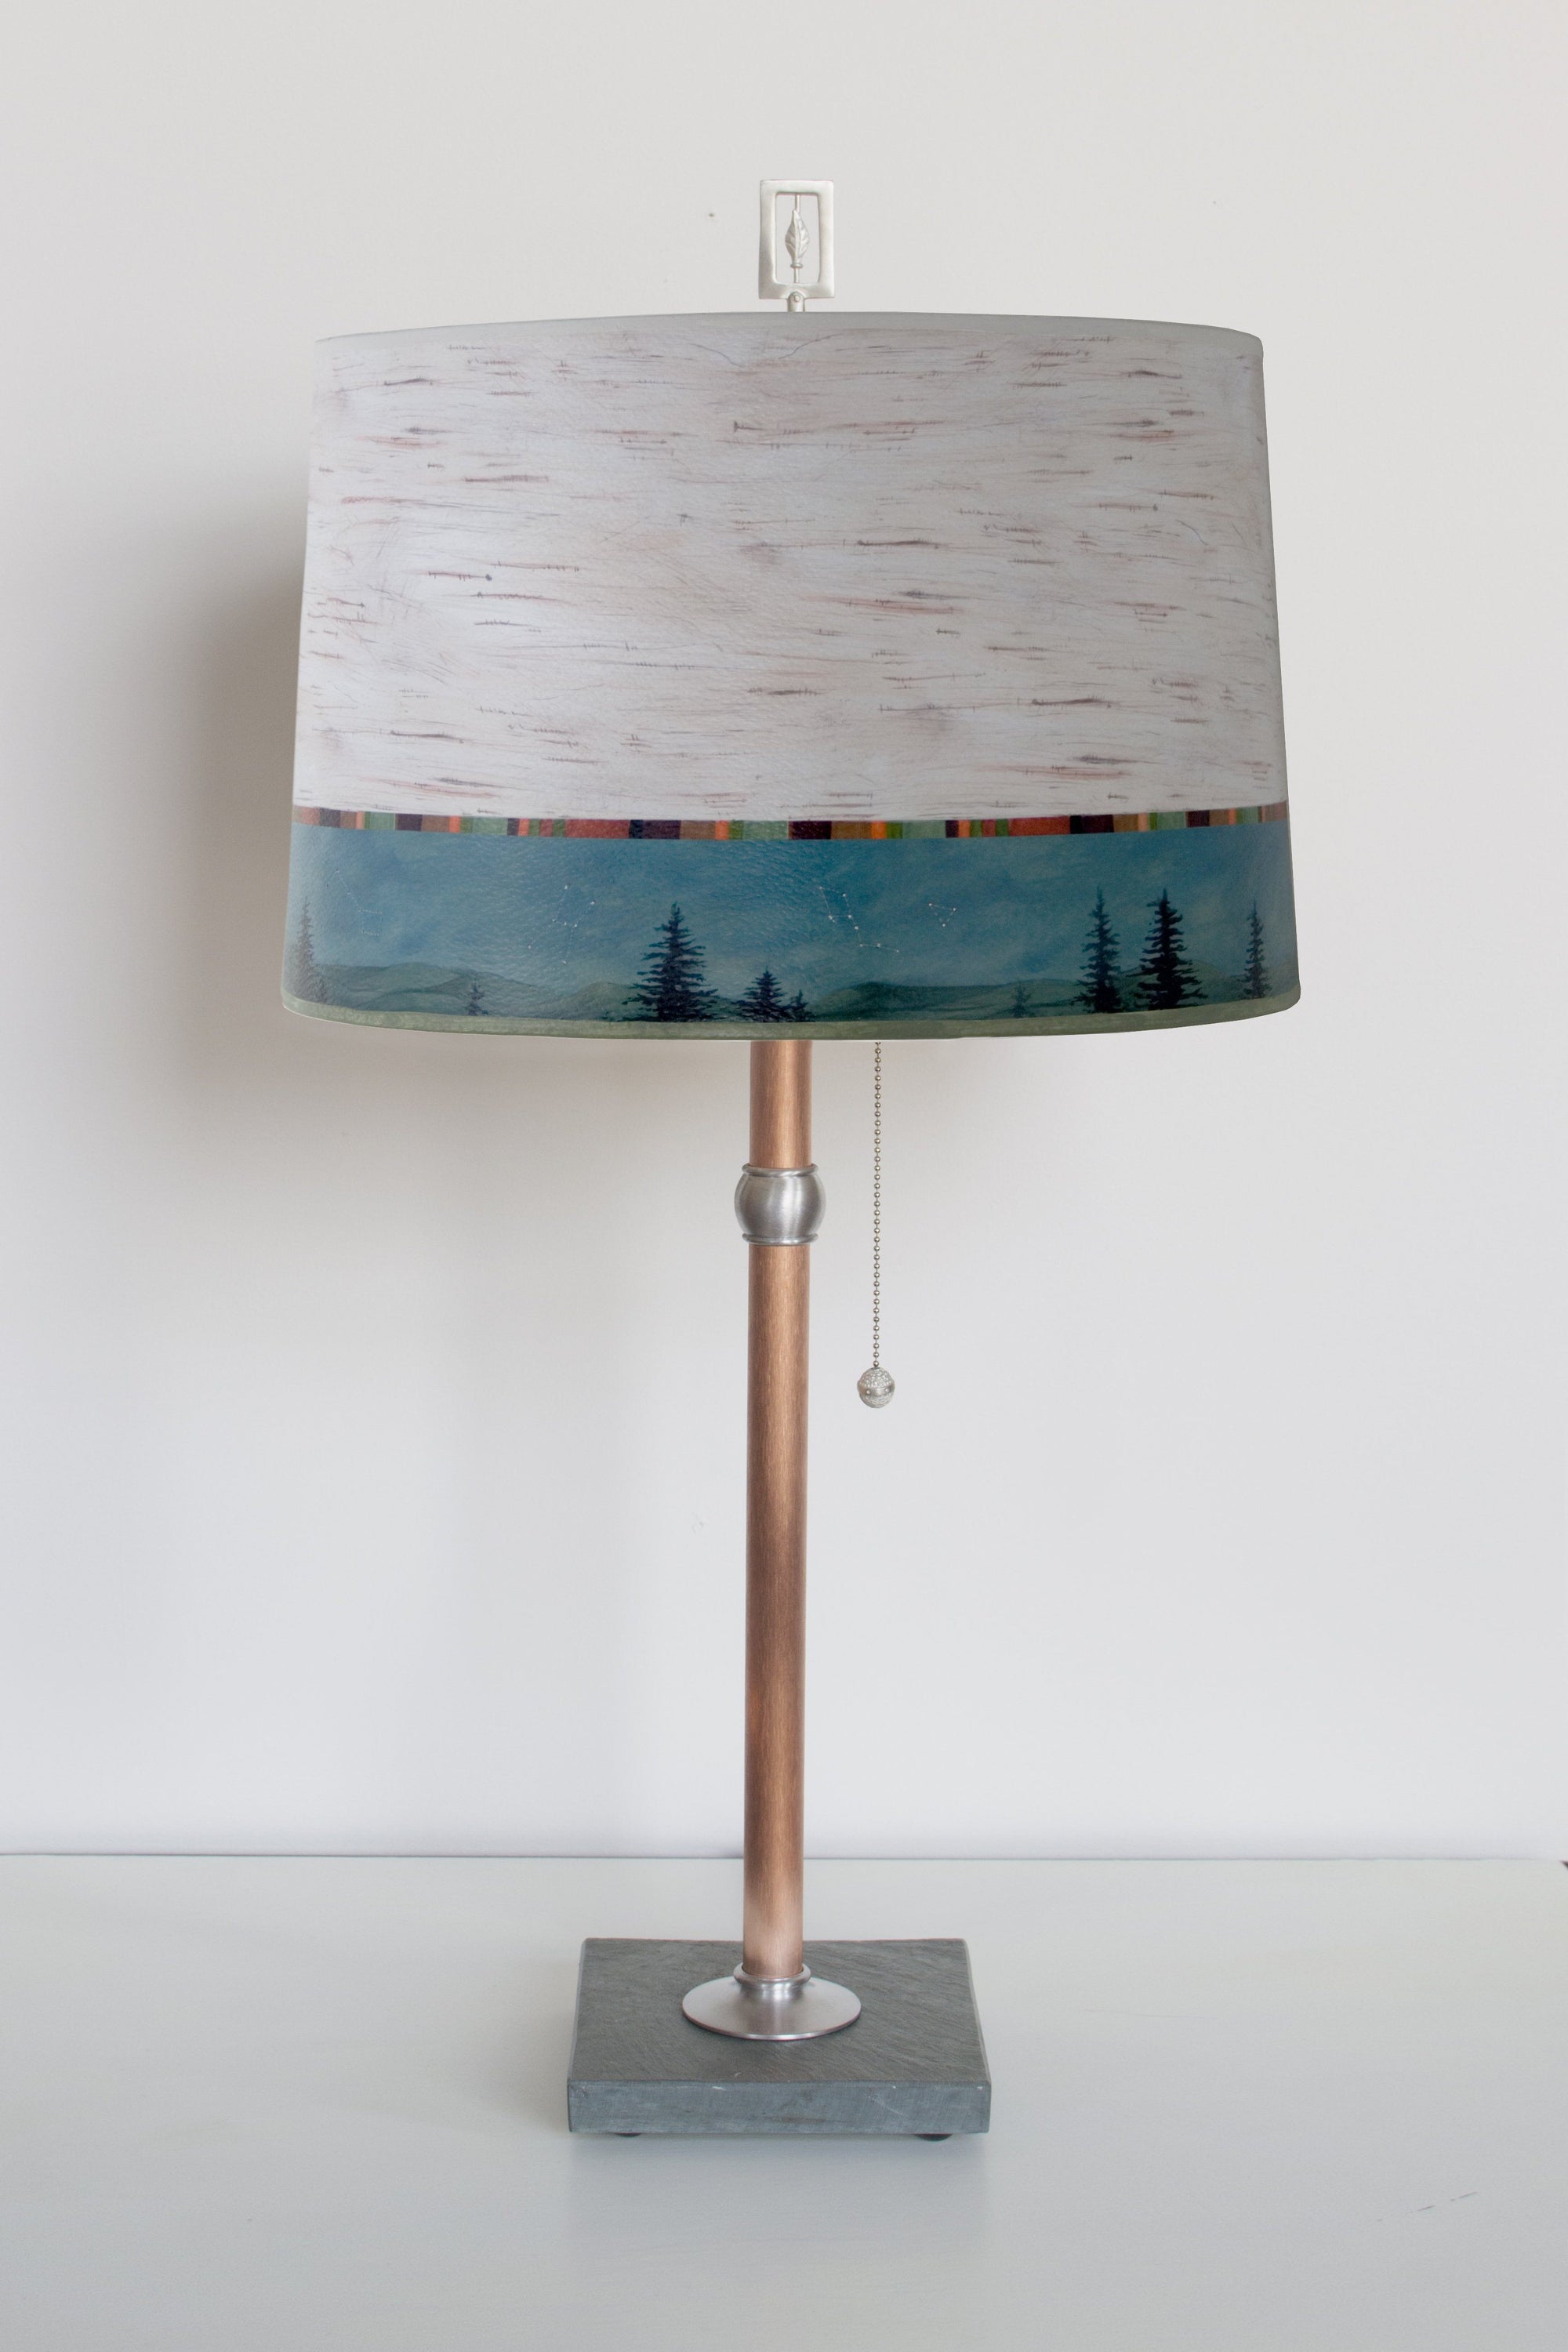 Janna Ugone & Co Table Lamps Copper Table Lamp with Large Drum Shade in Birch Midnight